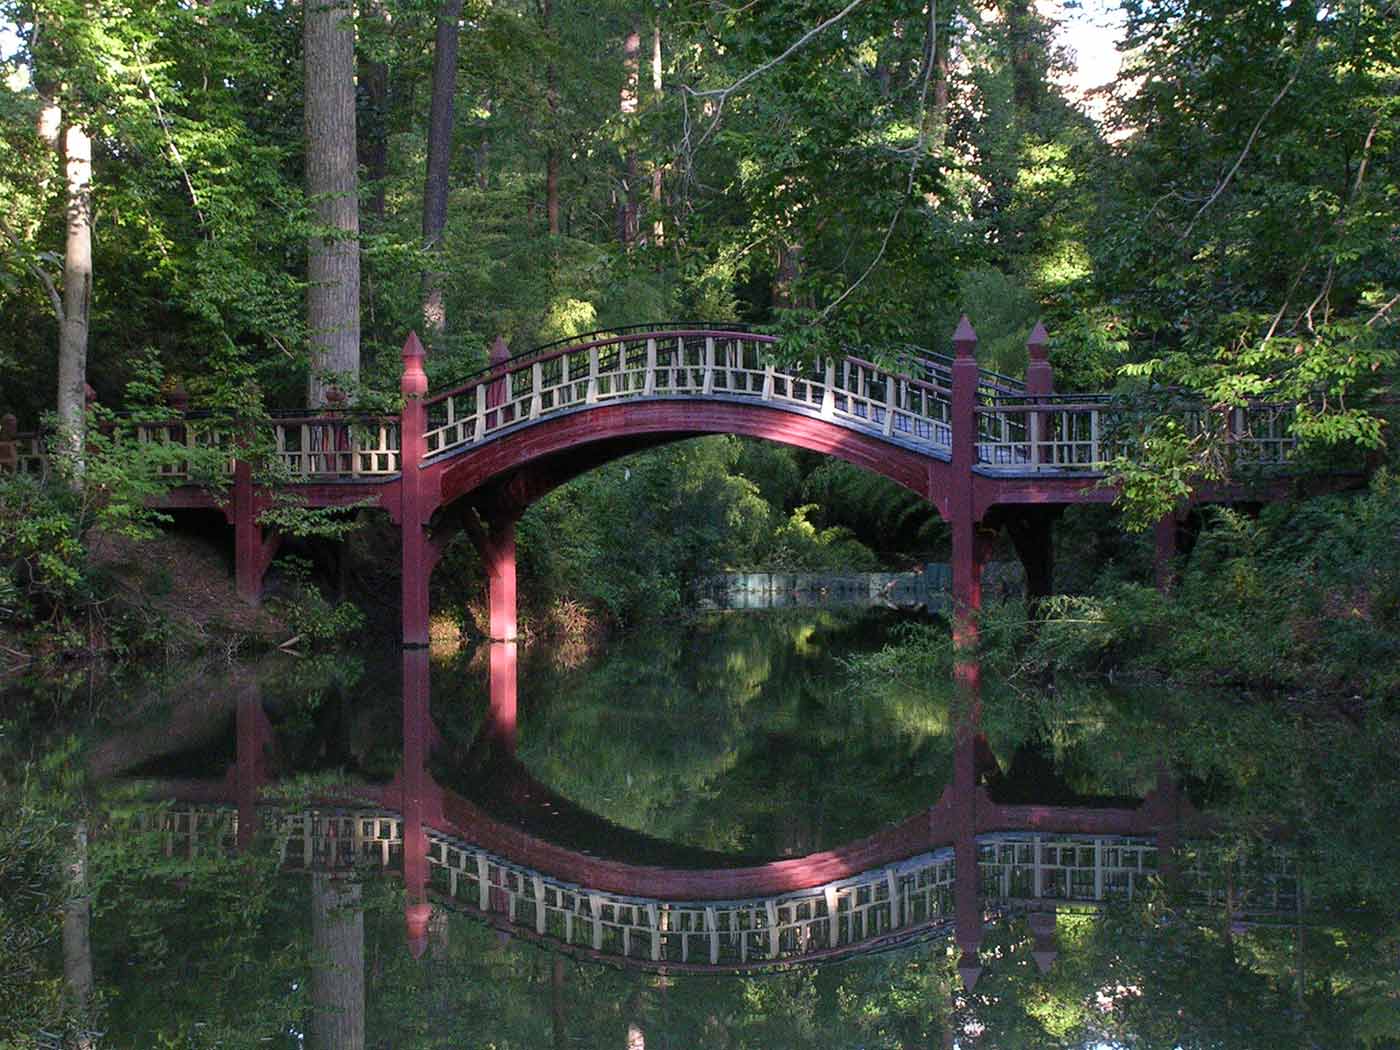 The bridge over the Crim Dell at the College of William and Mary